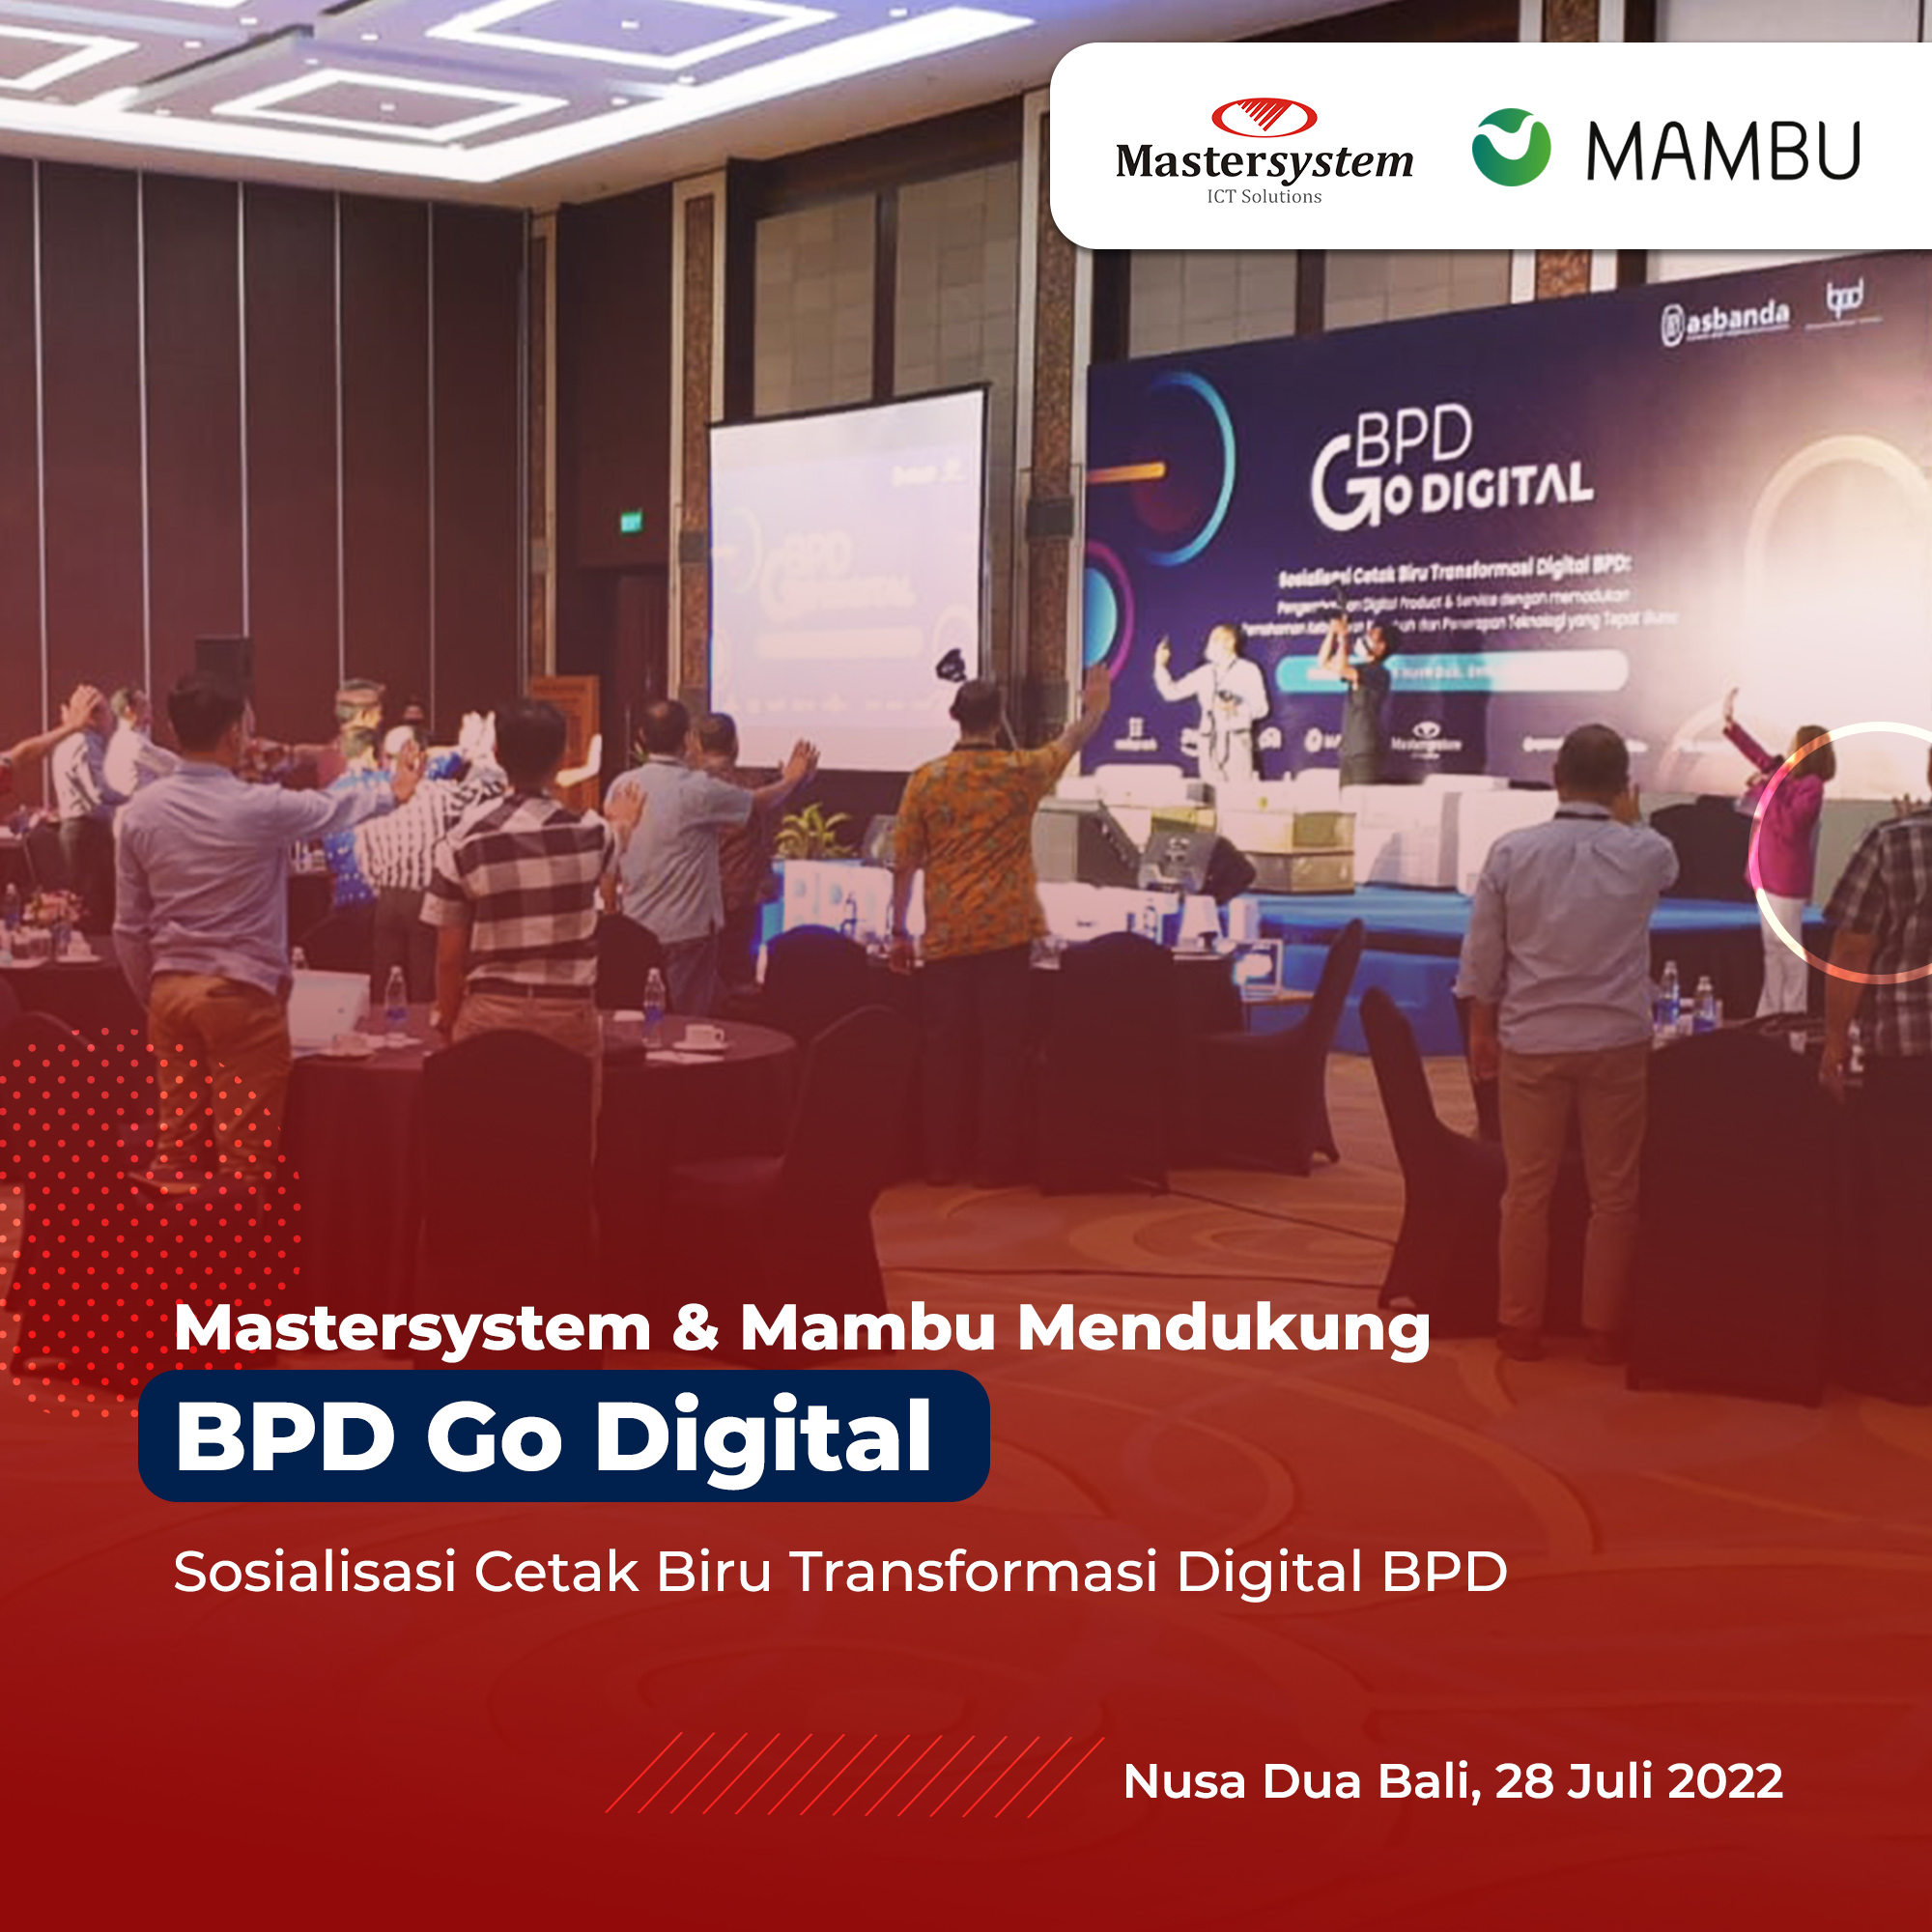 Mastersystem and Mambu Supported BPD Go Digital Conference